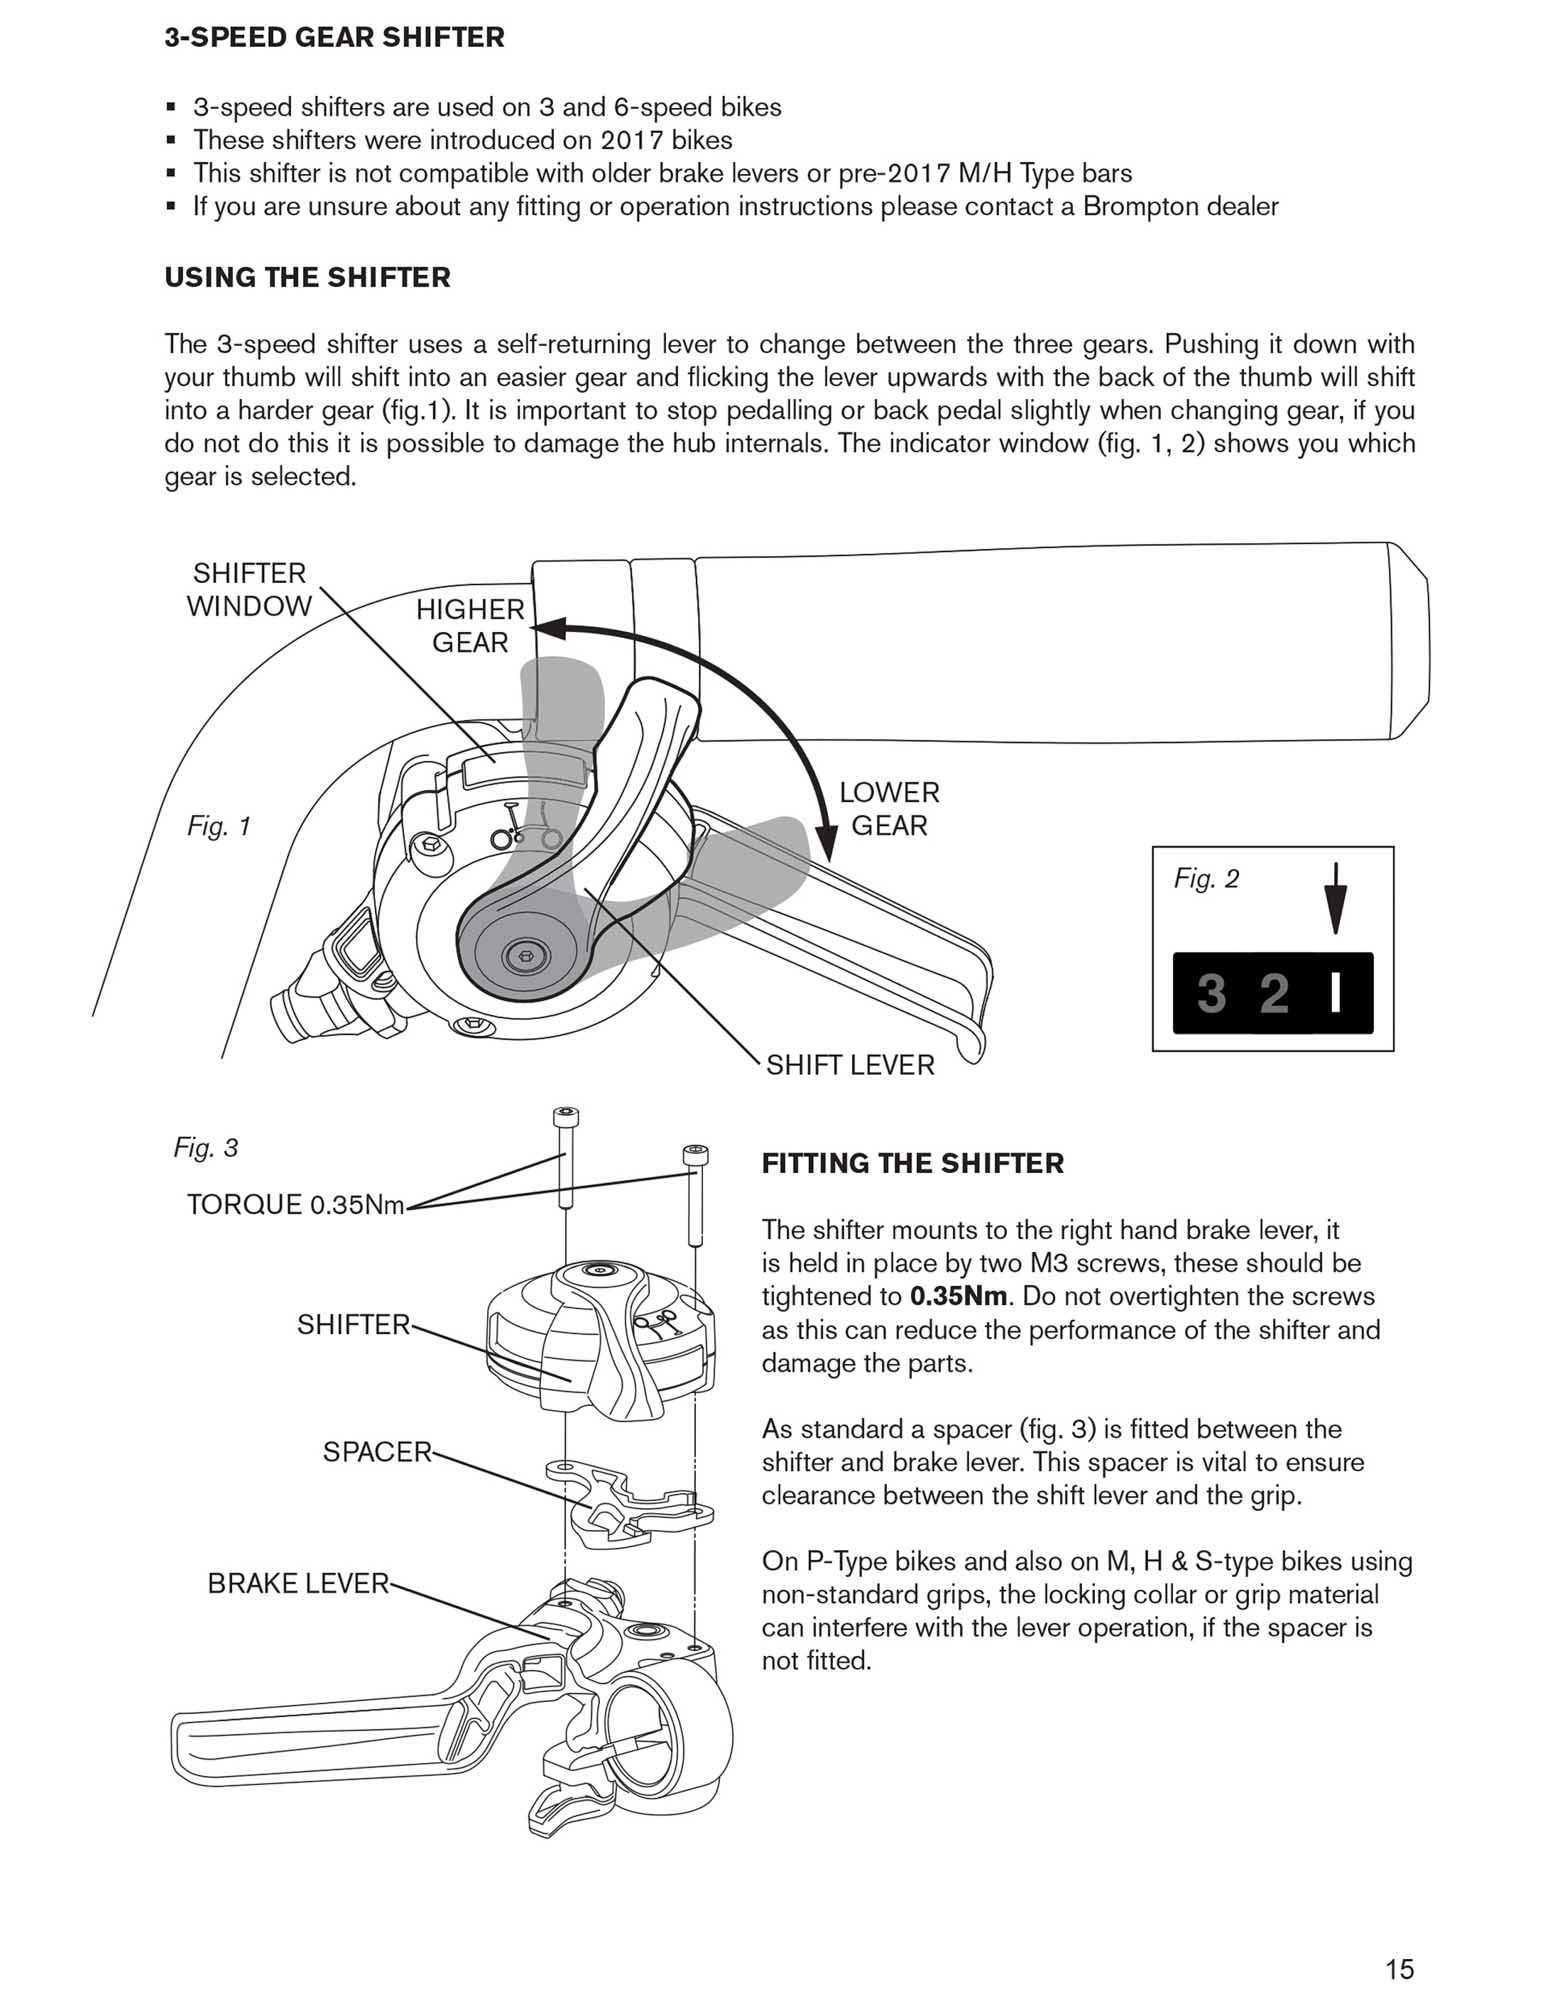 Brompton - Owners Manual 2017 page 15 main image